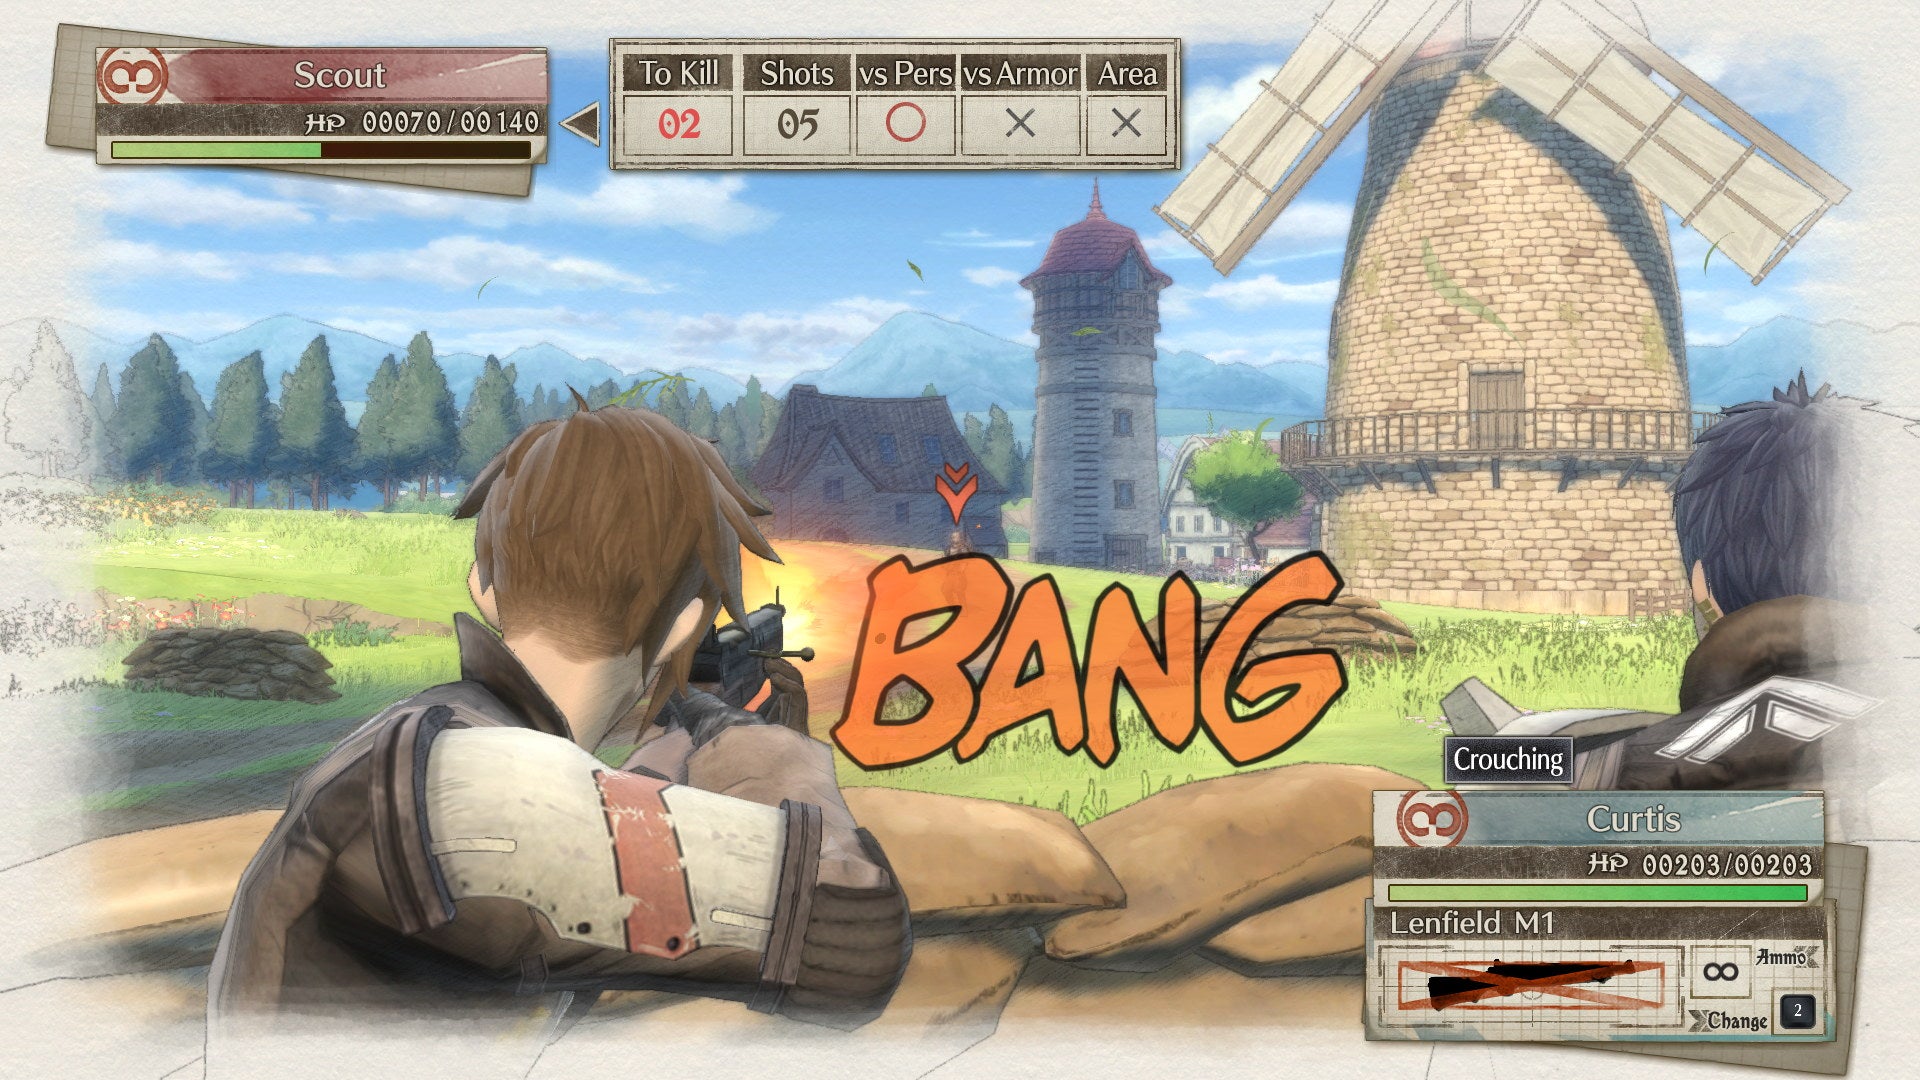 Image for Valkyria Chronicles 4 is out now